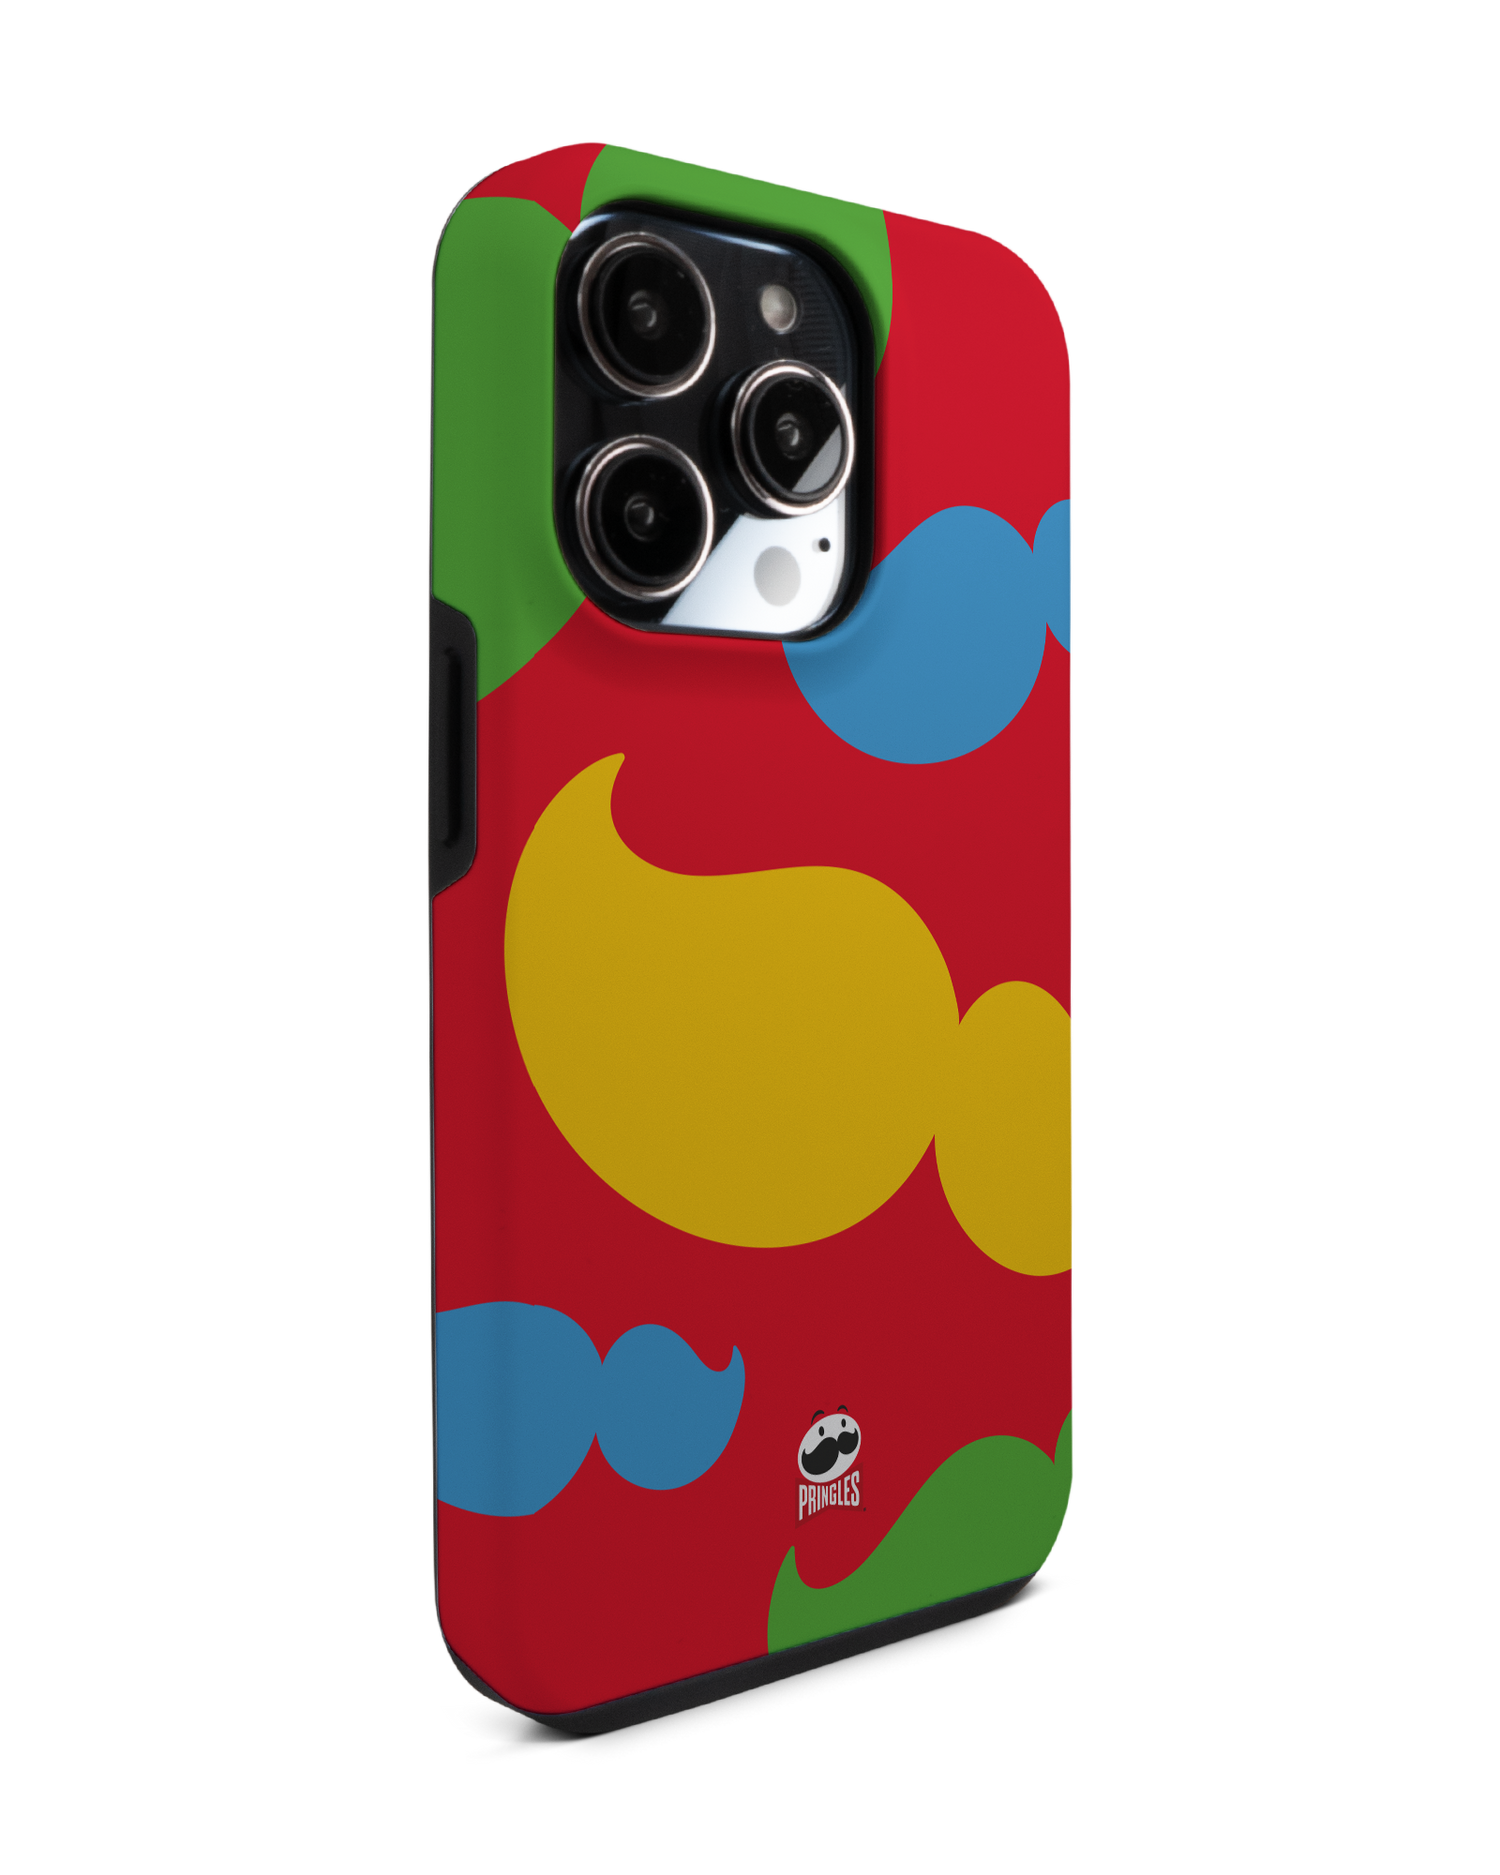 Pringles Moustache Premium Phone Case for Apple iPhone 14 Pro: View from the left side